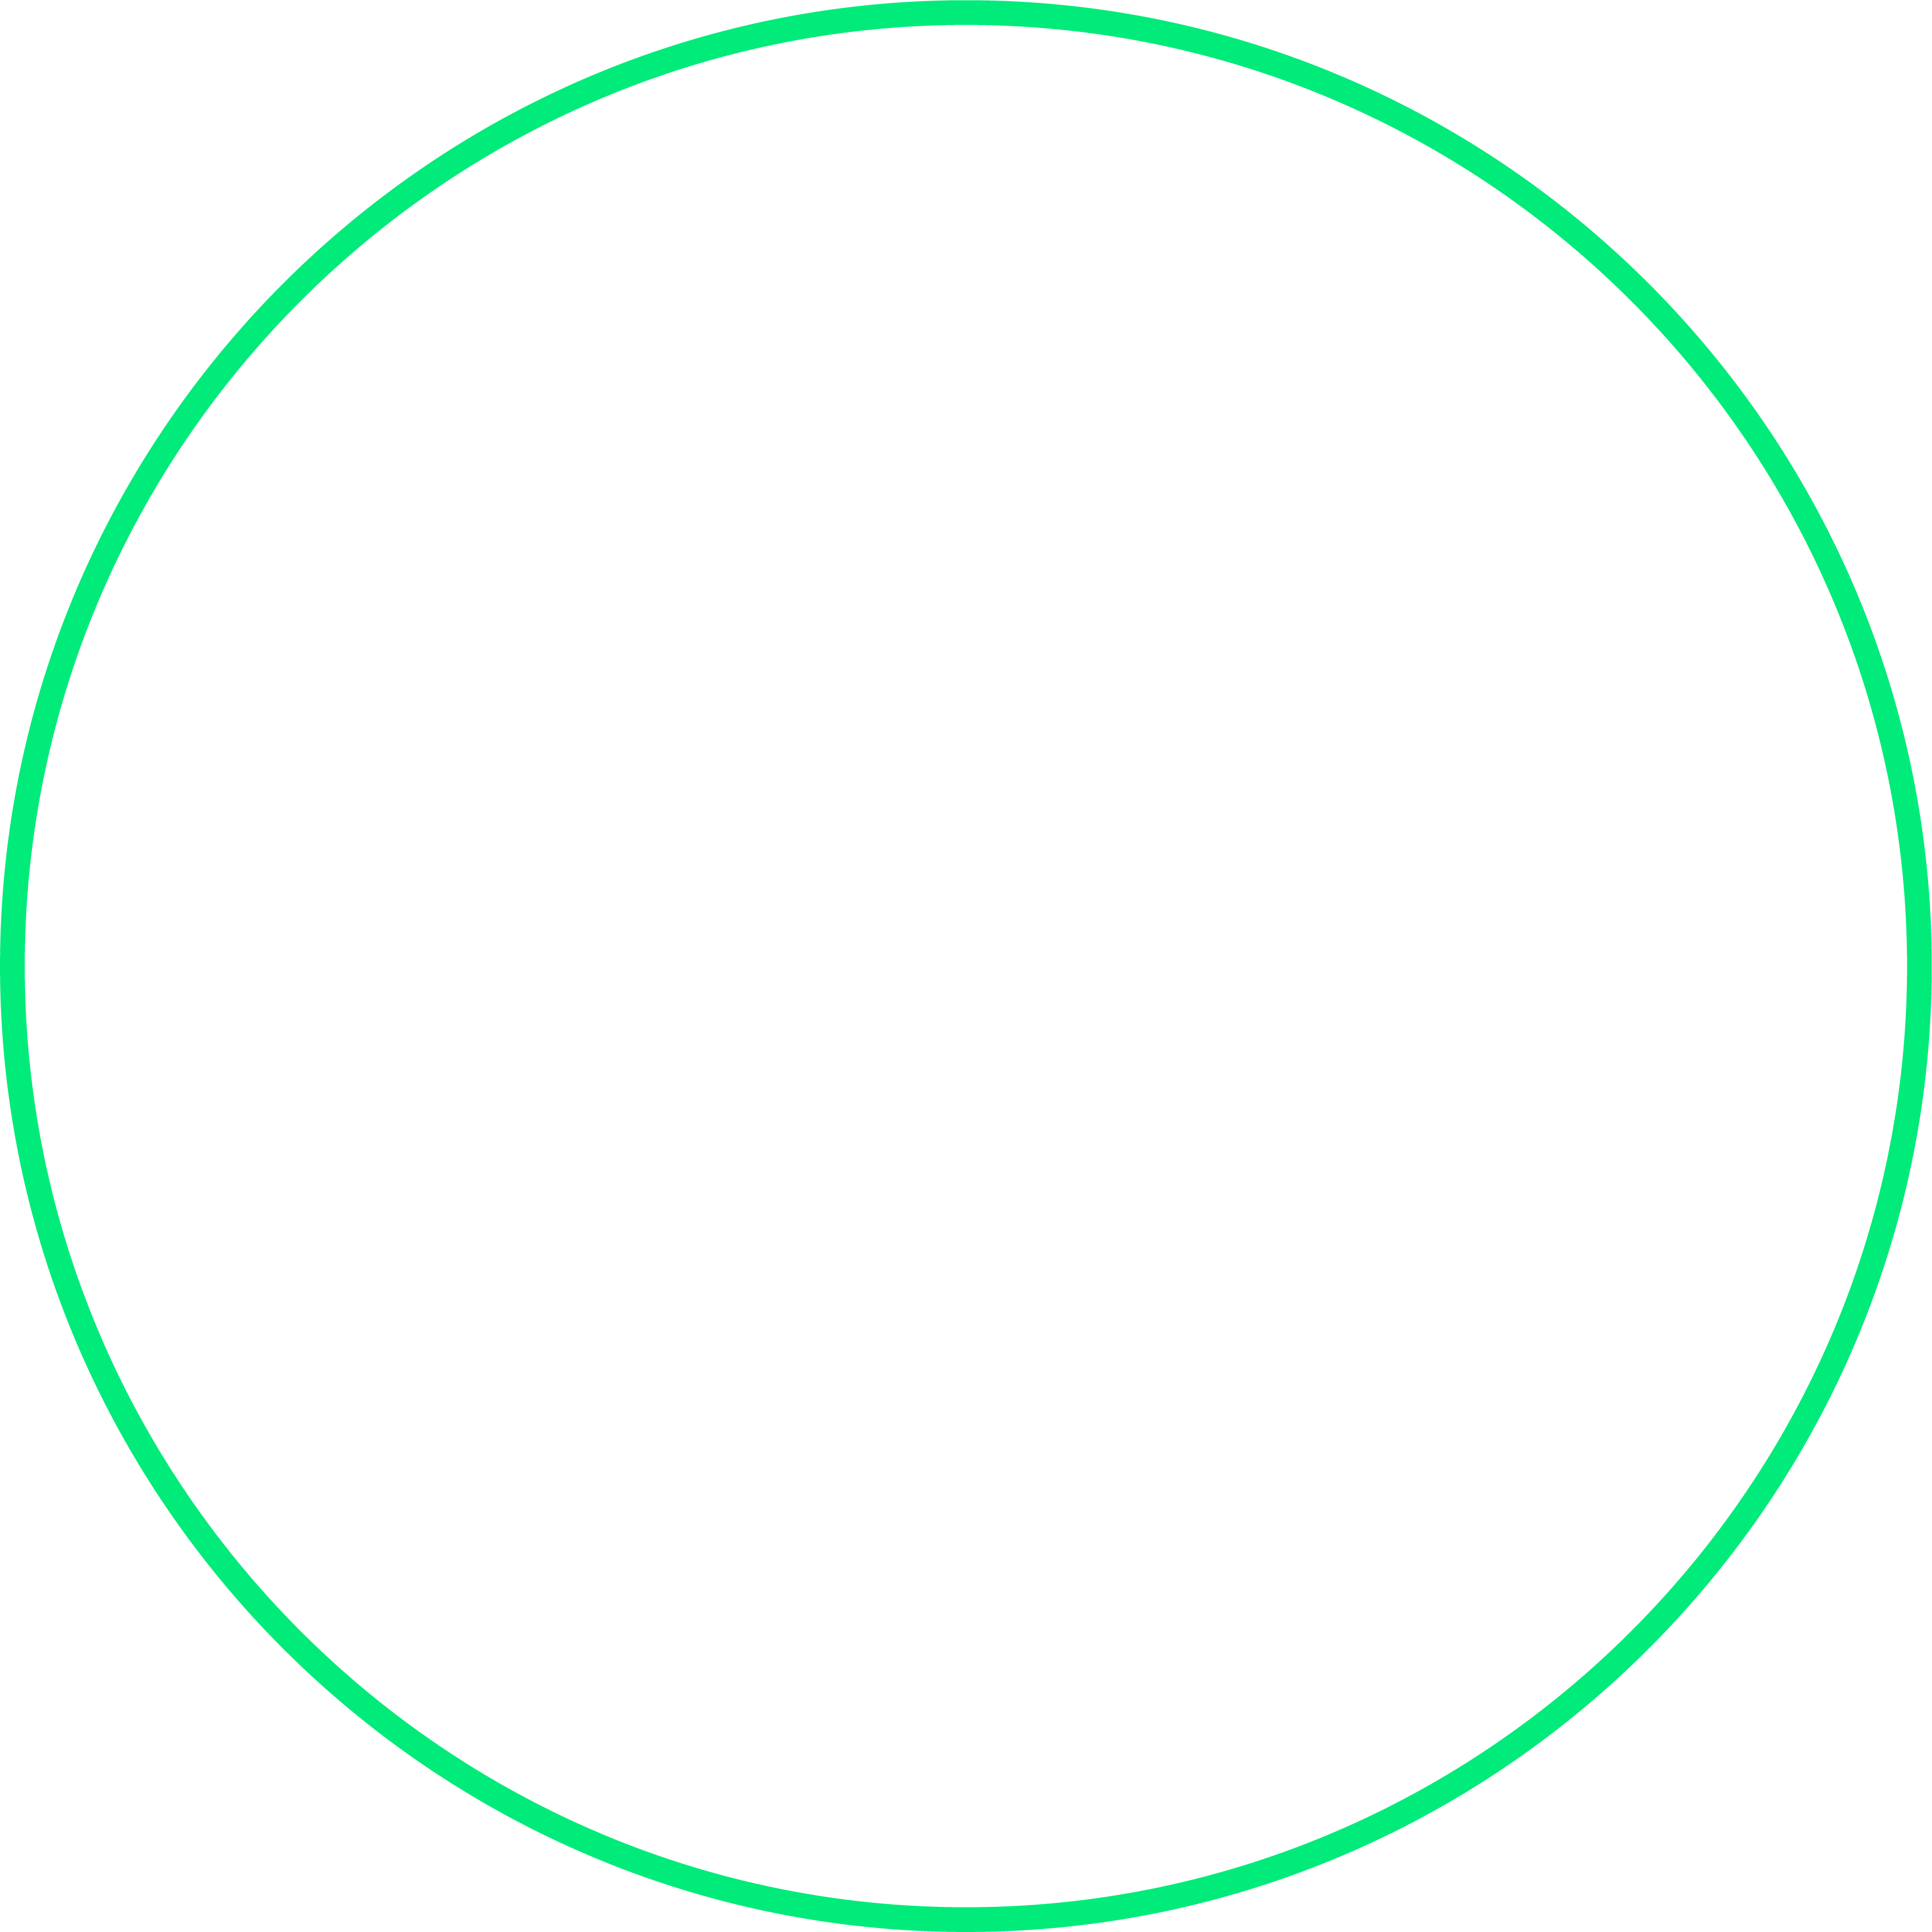 An outline of a bright green circle.